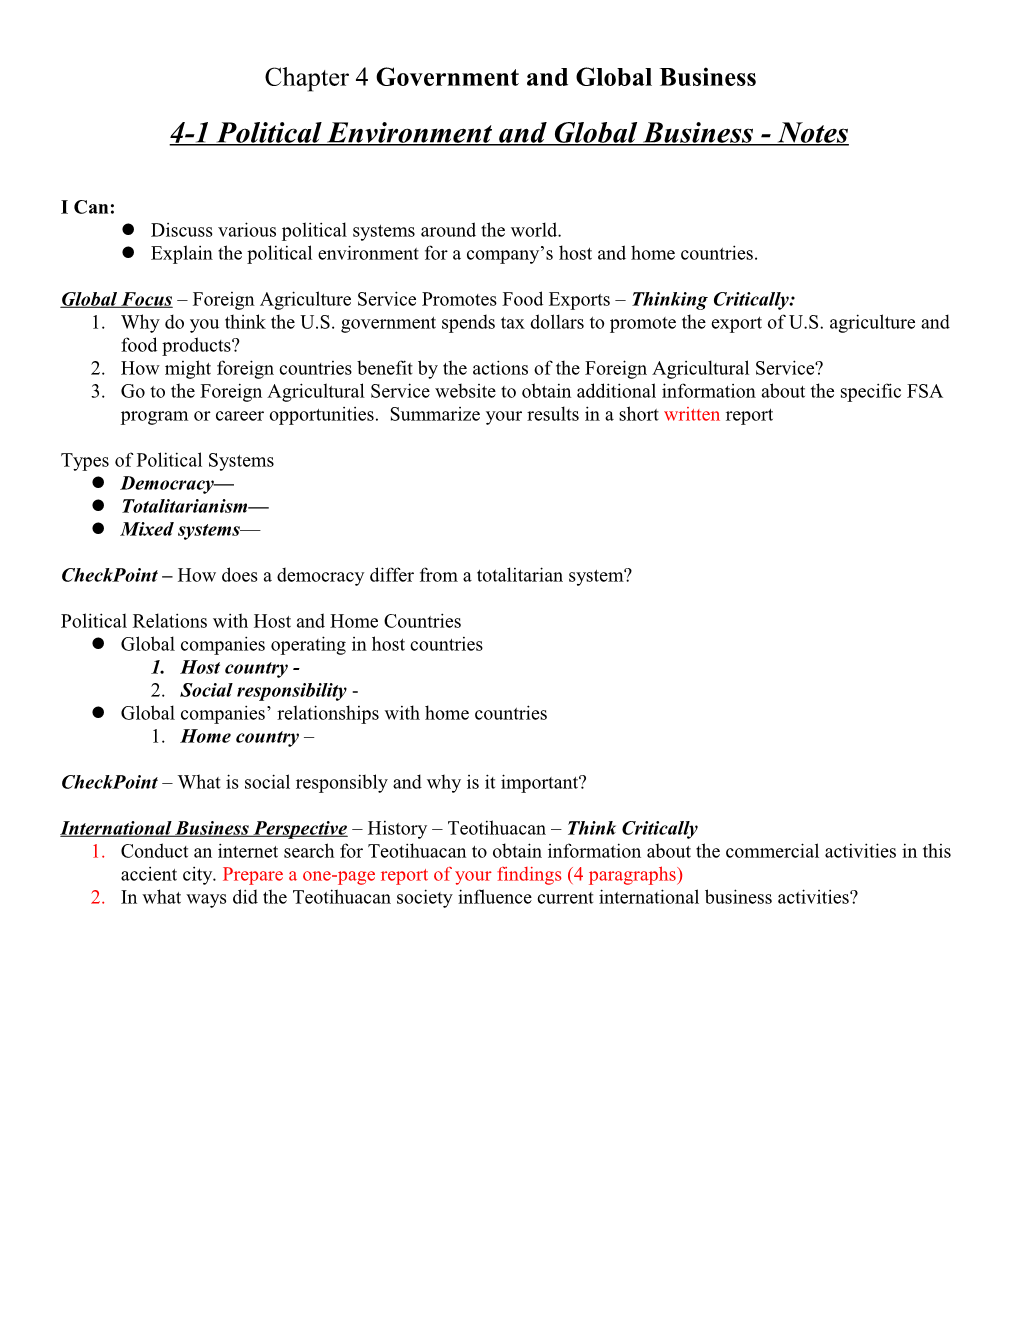 4-1 Political Environment and Global Business - Notes